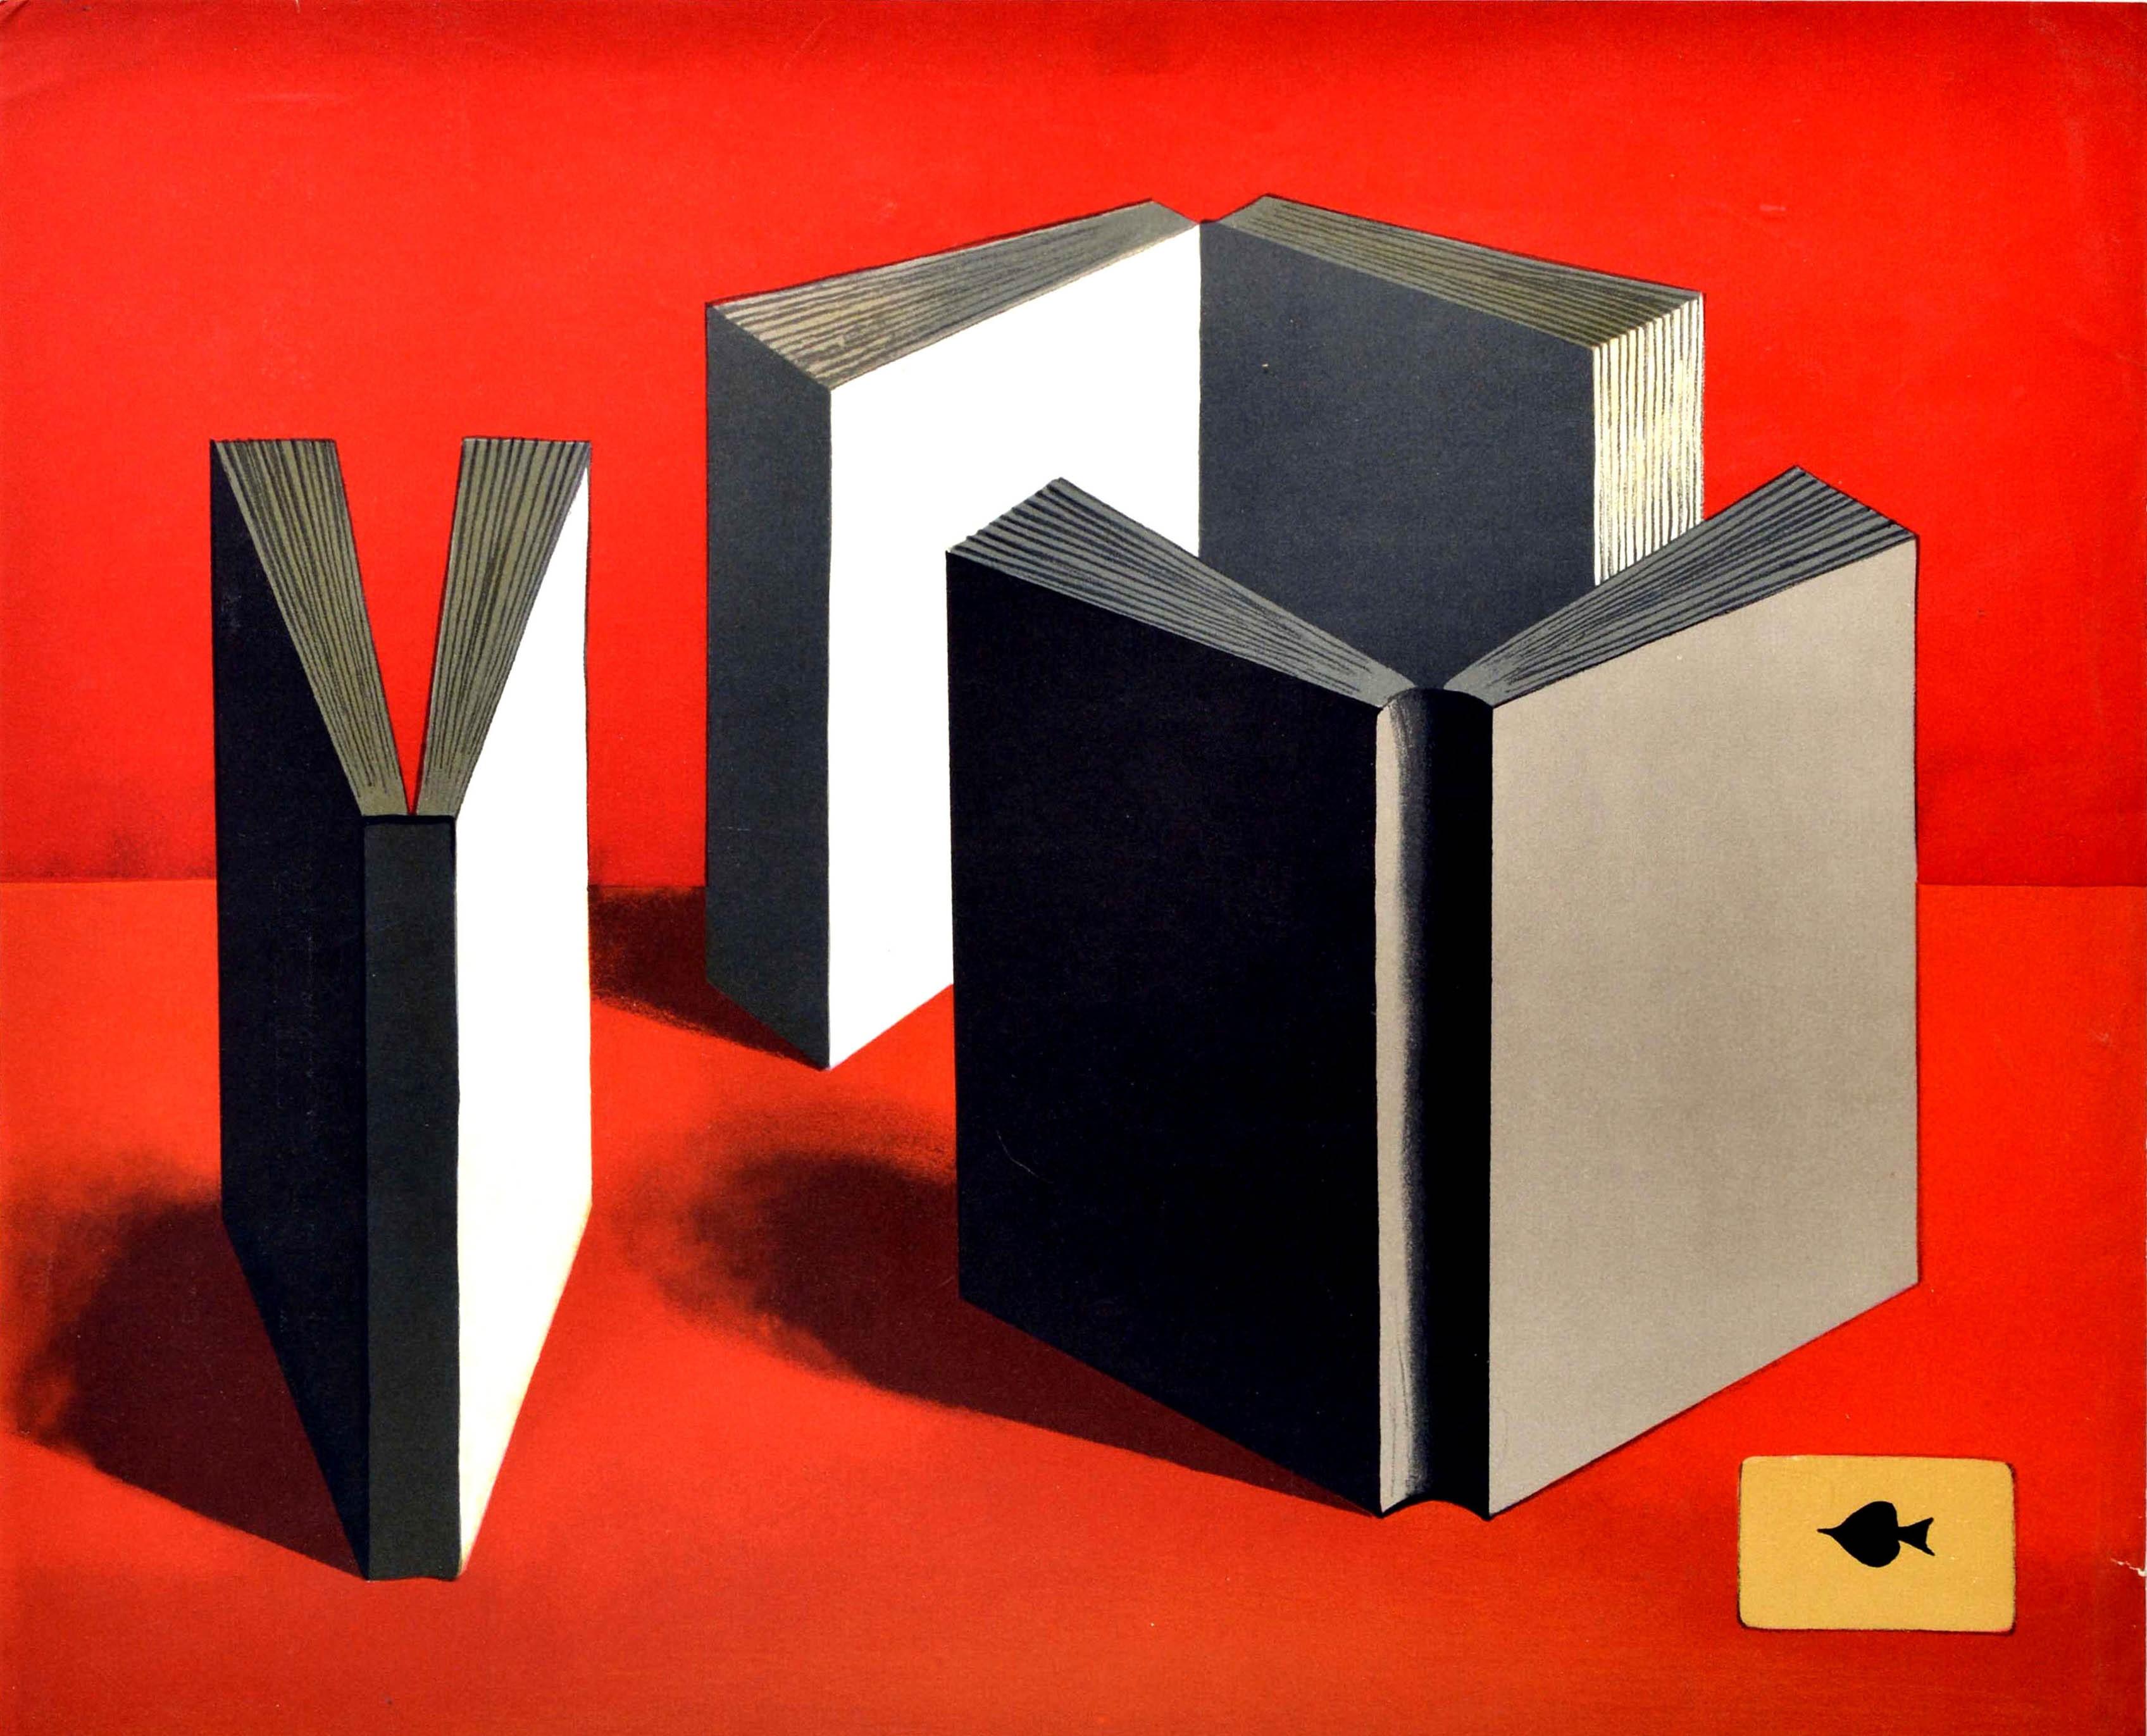 Original vintage art exhibition poster - Rohner - Galerie de Paris 14 Place Francois 1er 28 January to 1 March featuring artwork by the French painter Georges Rohner (1913-2000) showing three open books standing next to an Ace of Spades playing card